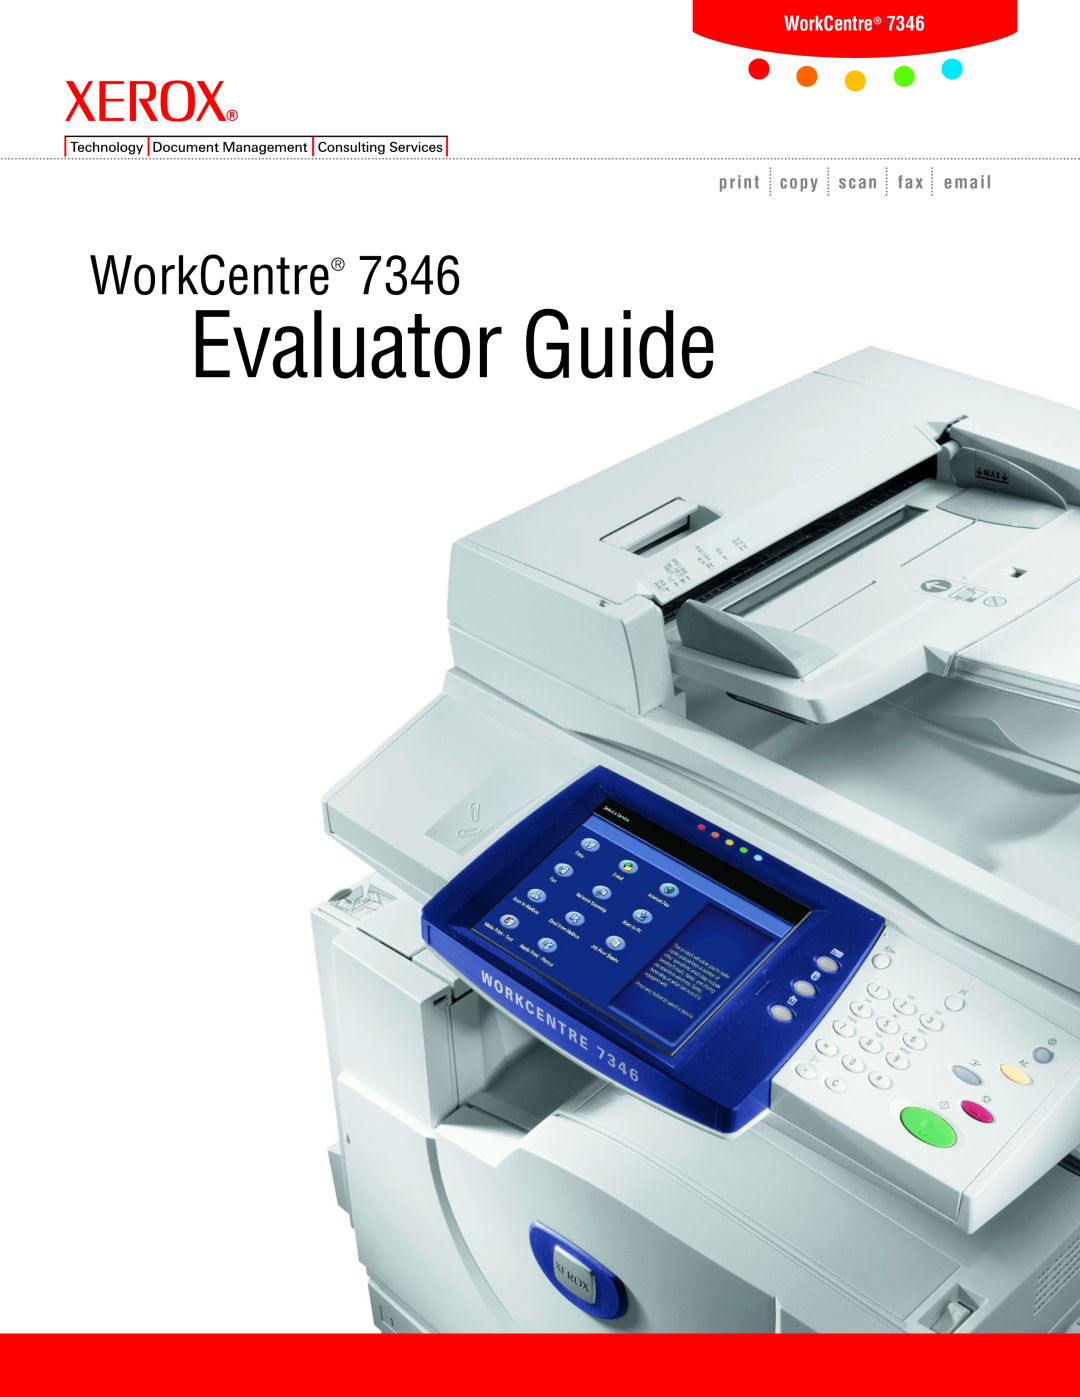 Xerox 7346 manual WorkCentre, Evaluator Guide, print copy scan fax email 